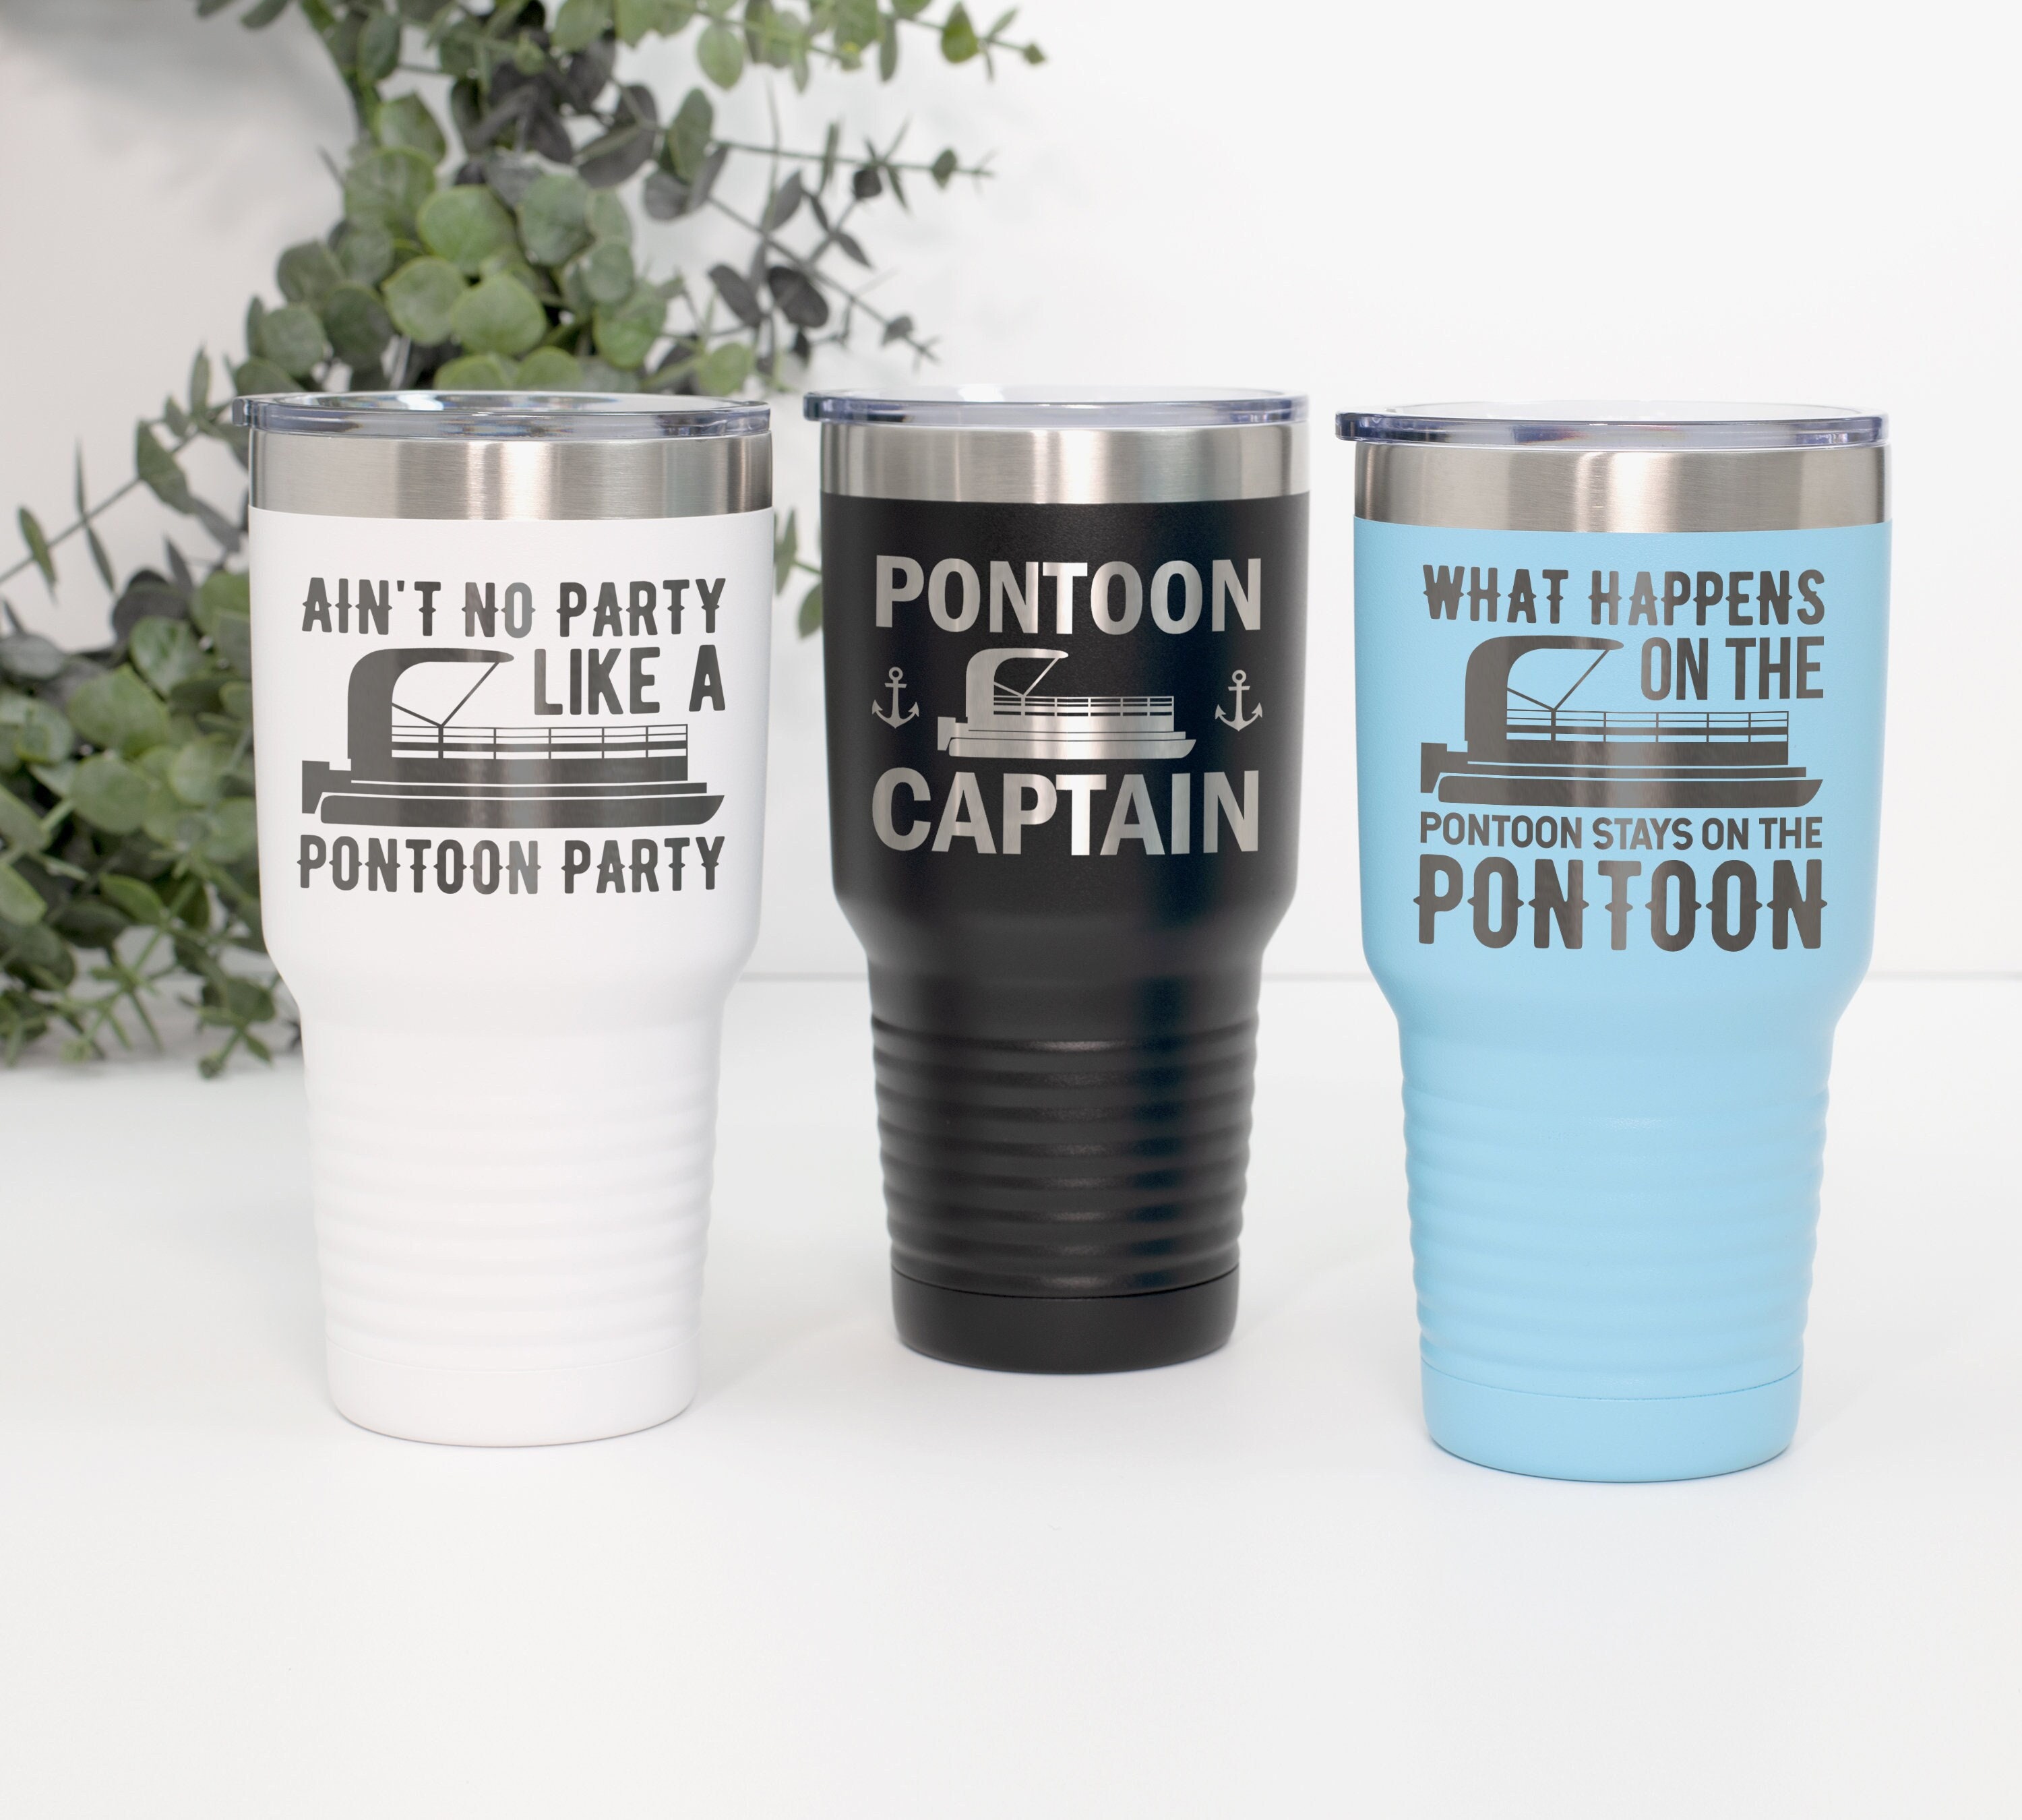 Pontoon Boat , Father's Day Gift, Pontoon Boats, Pontoon Boat Gifts, Gift  for Husband, Lake Life, Gift for Men, Gift for Women, Coffee Mug 